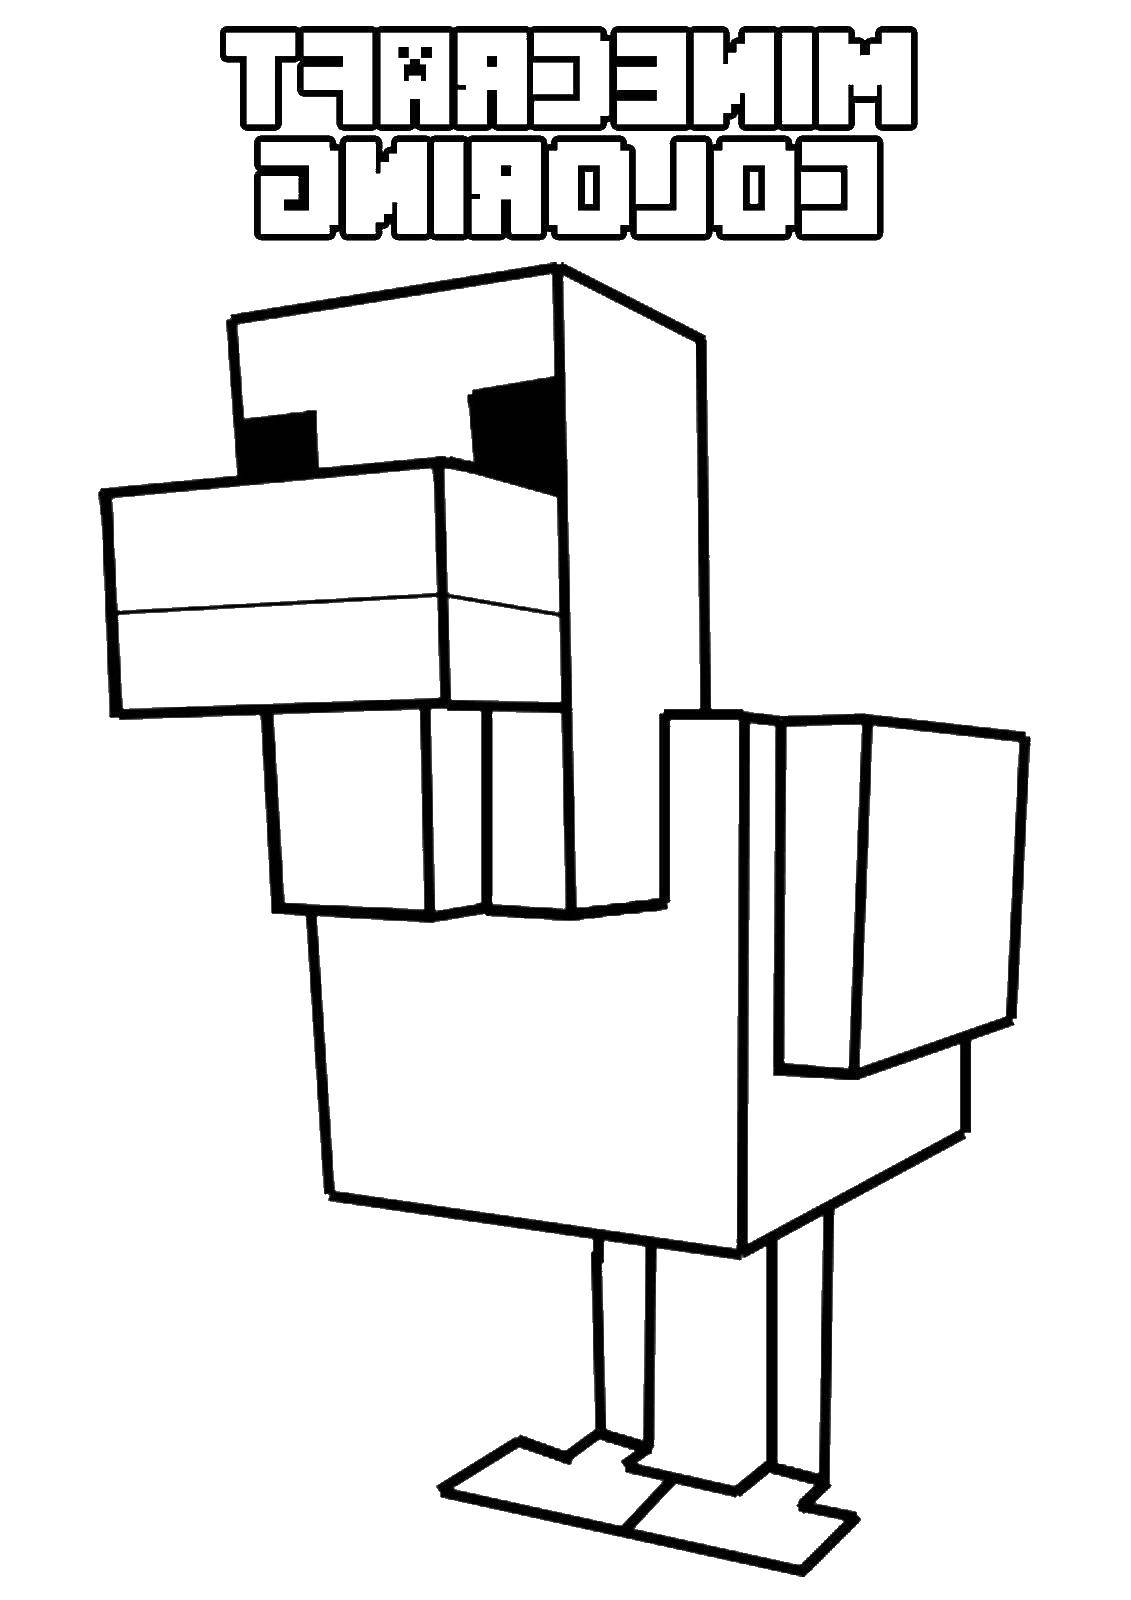 Coloring Minecraft duck. Category minecraft. Tags:  minecraft, duck.